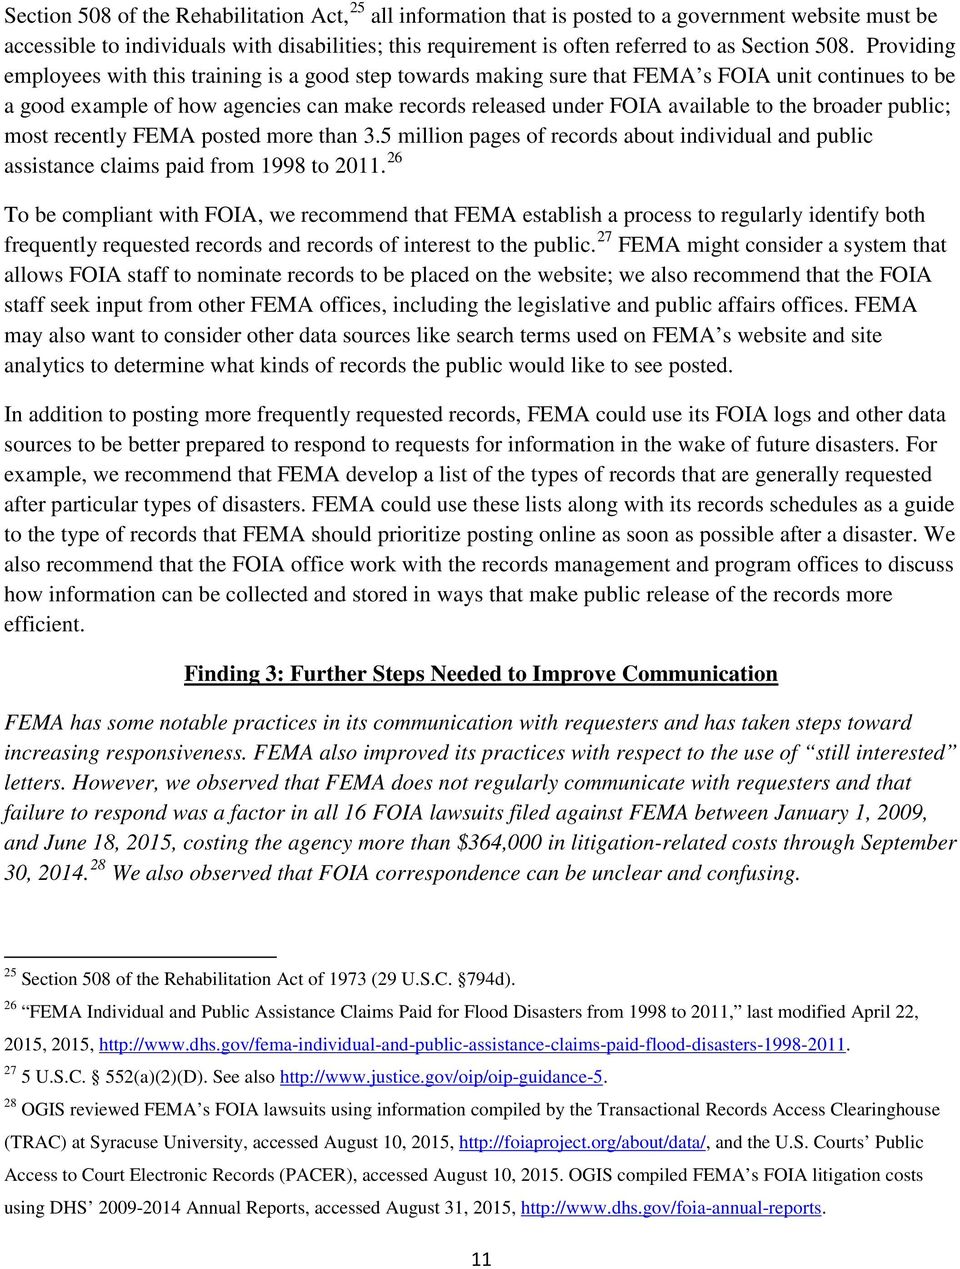 the broader public; most recently FEMA posted more than 3.5 million pages of records about individual and public assistance claims paid from 1998 to 2011.